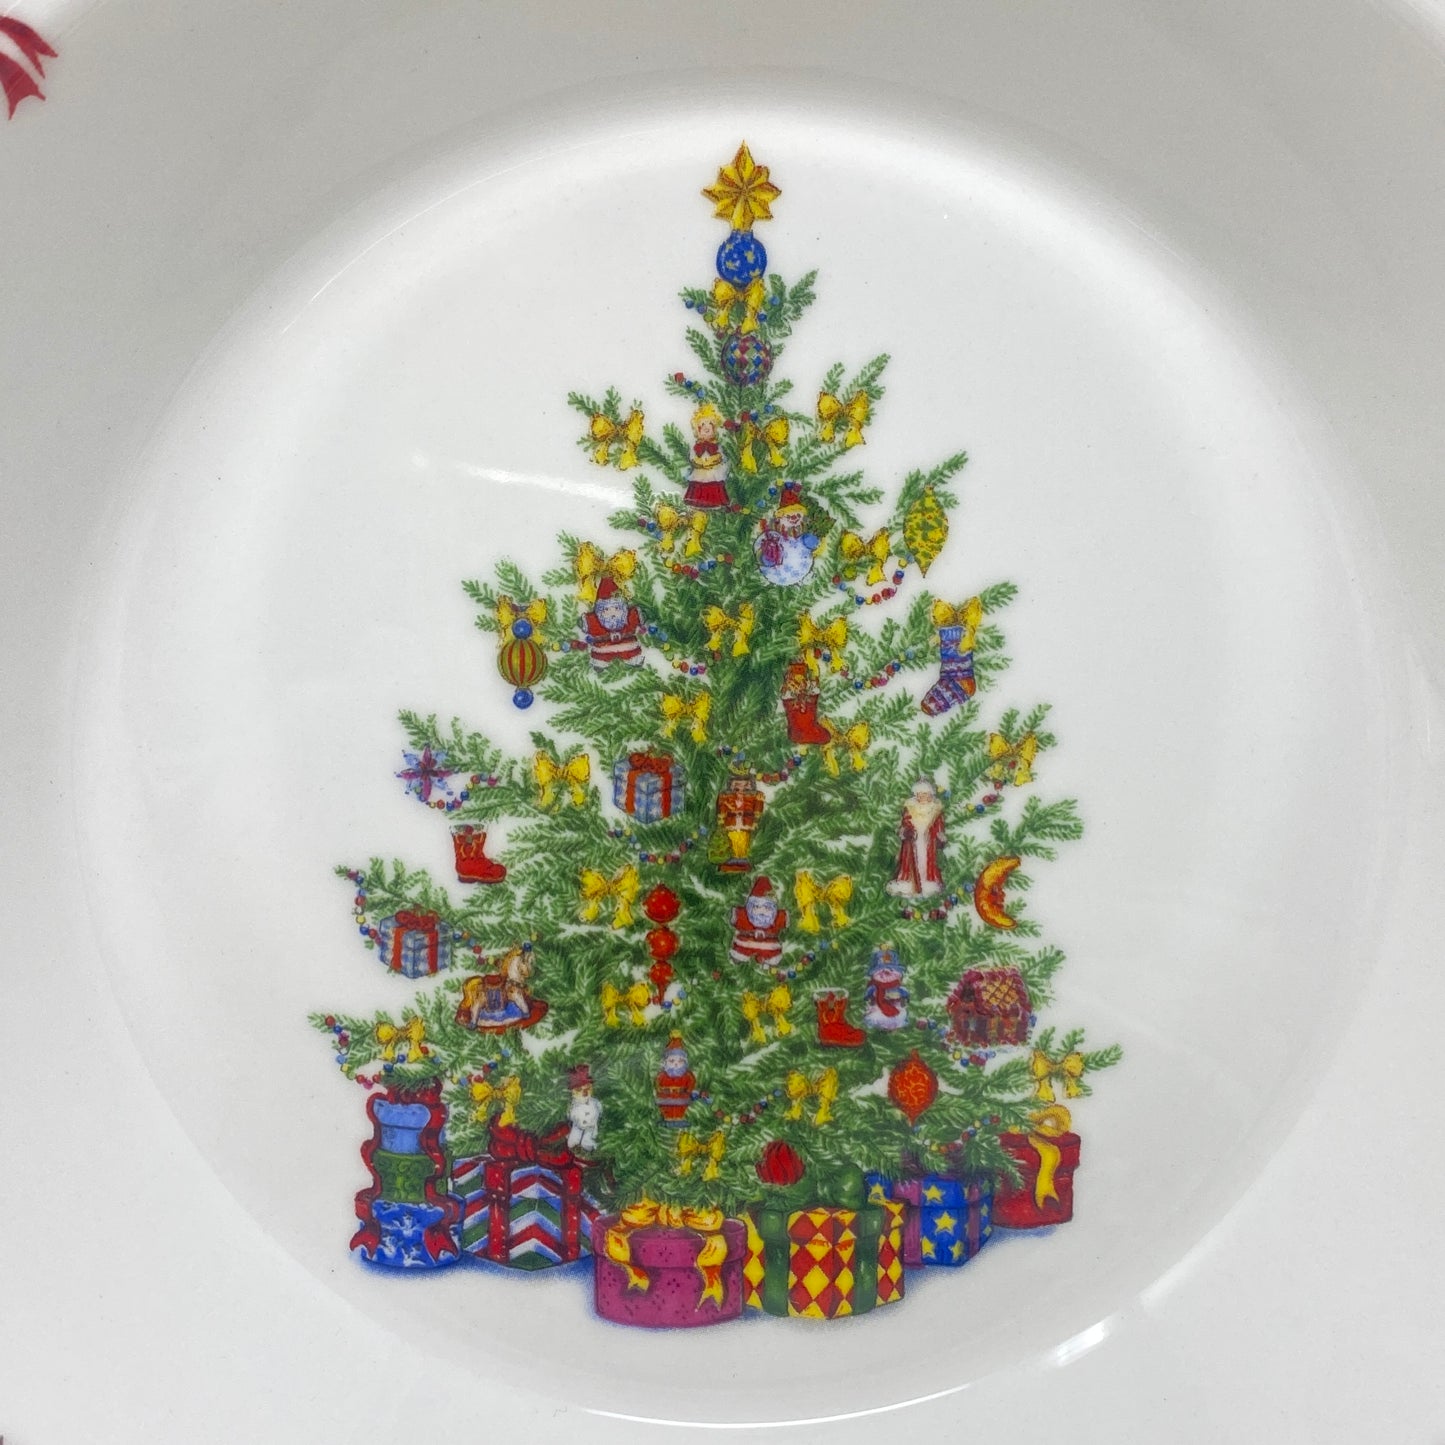 Christopher Radko Traditions "Holiday Celebrations" 9" Rimmed Soup Bowls (8)